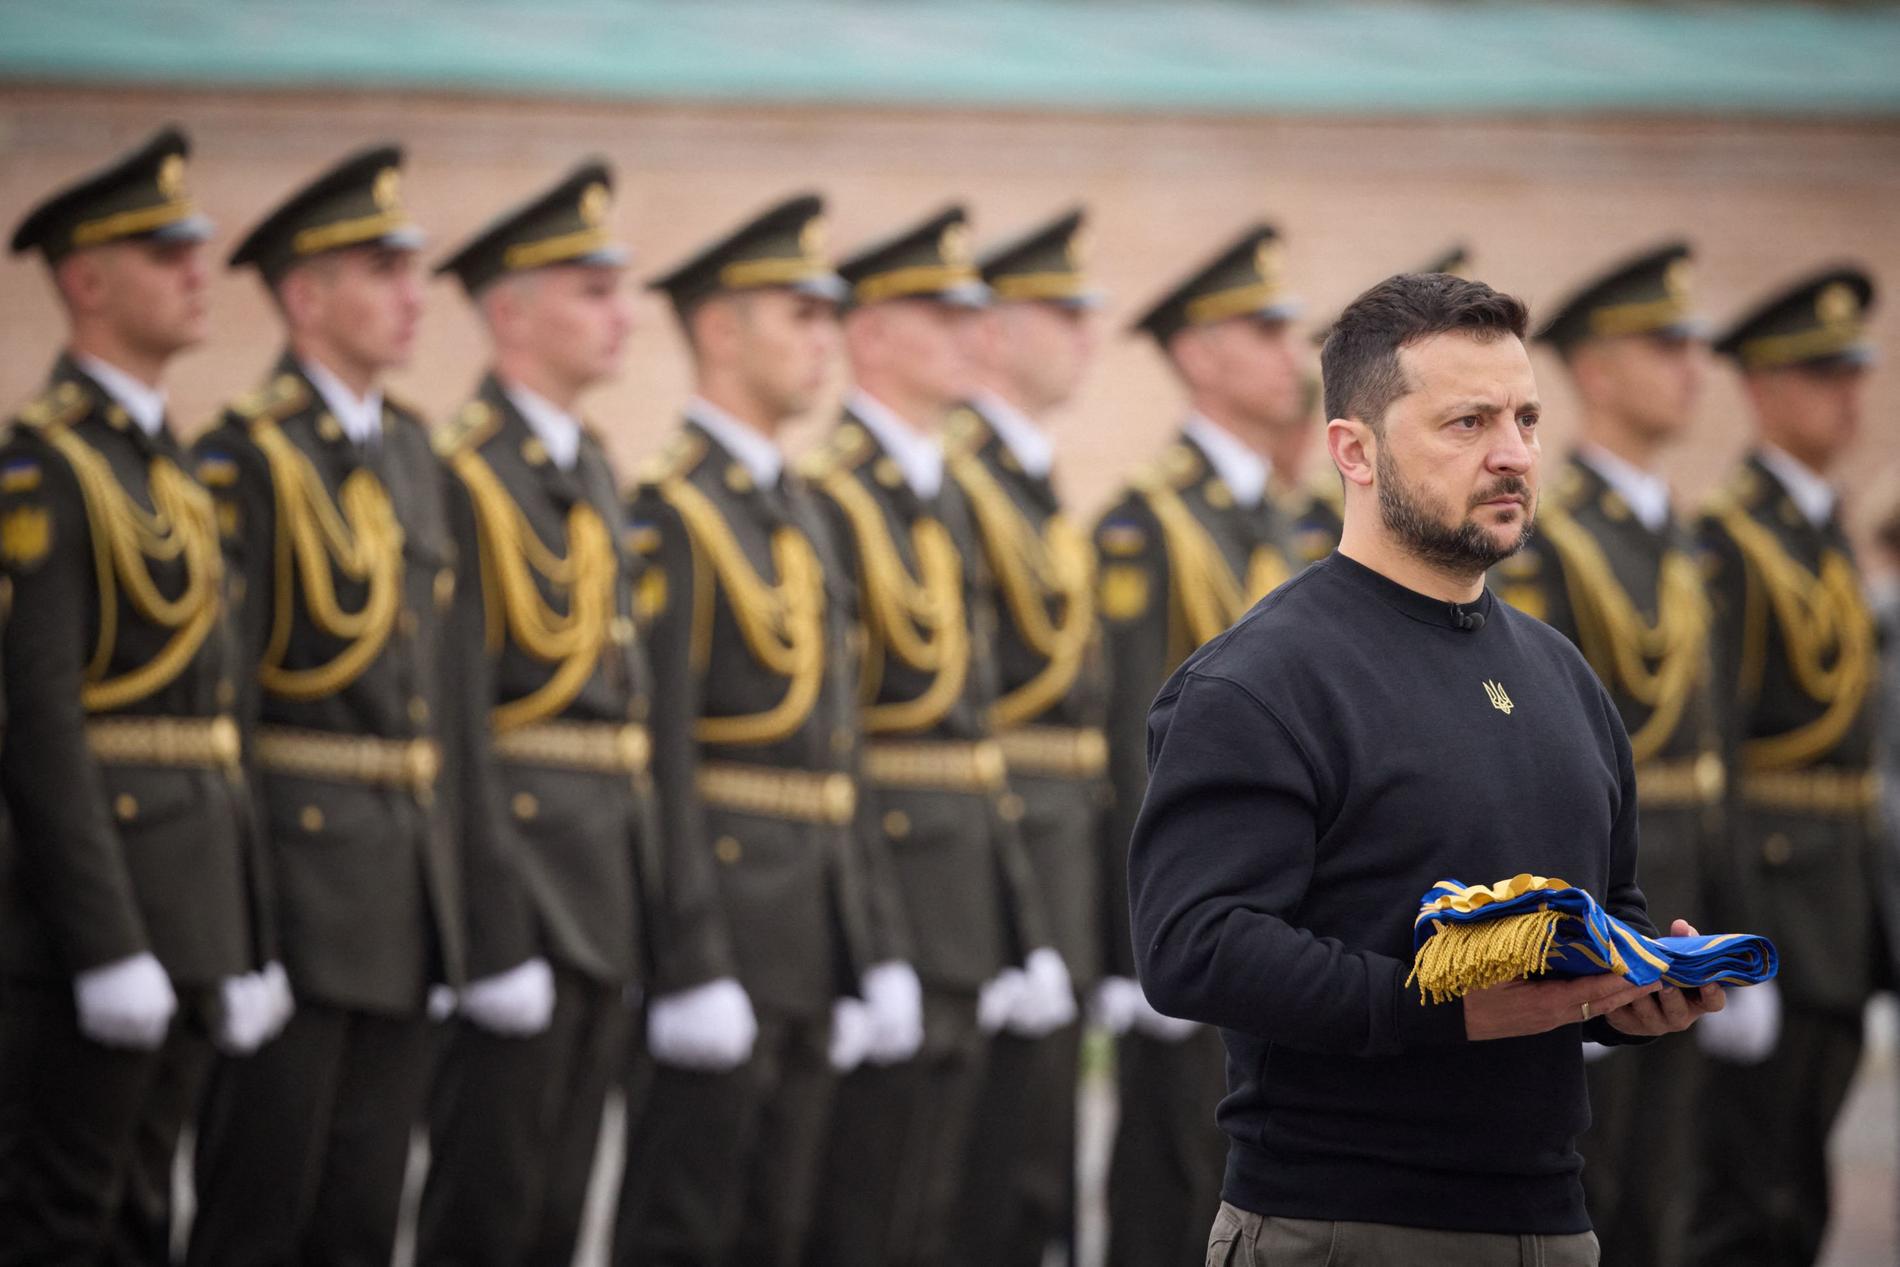 Ukraine’s Response to Russia’s Winter Bombing: Ceremony in Kyiv and President Volodymyr Zelenskyj’s Defense Strategy